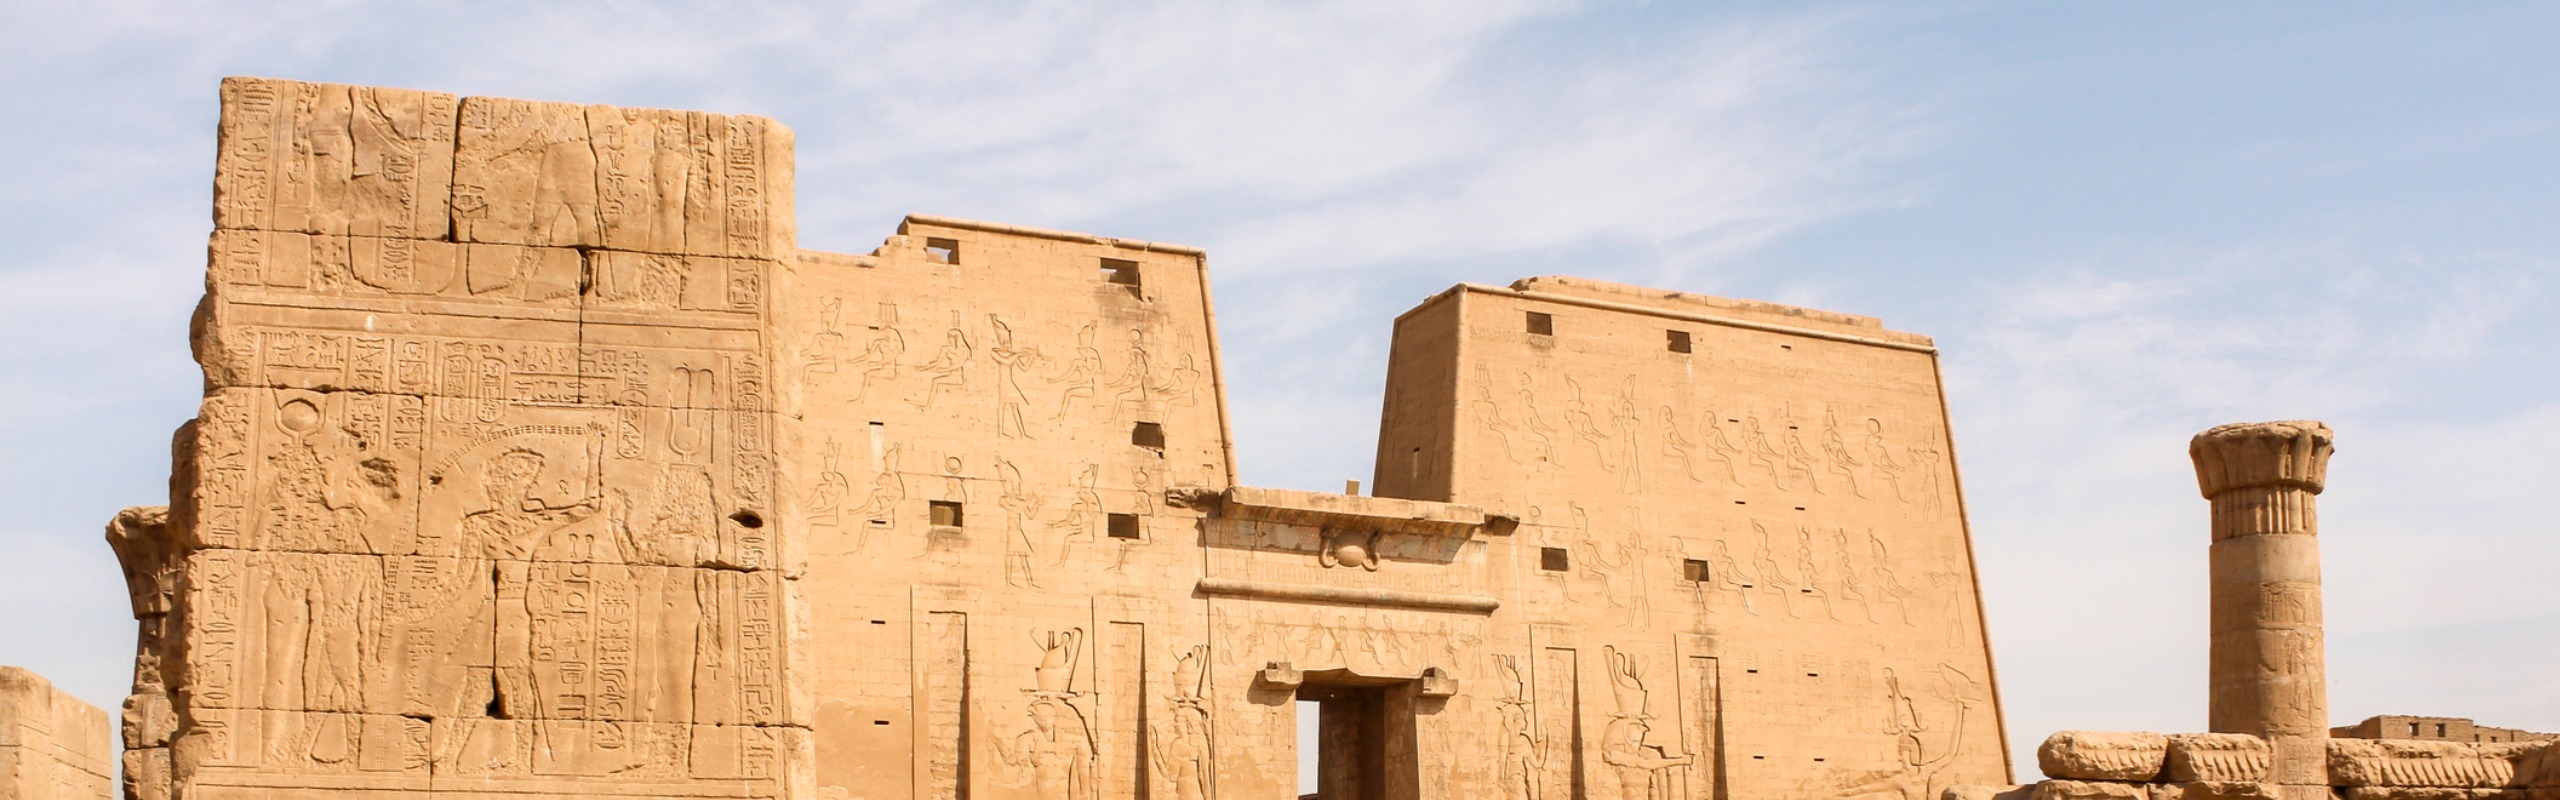 The Temple of Edfu: How to Visit It